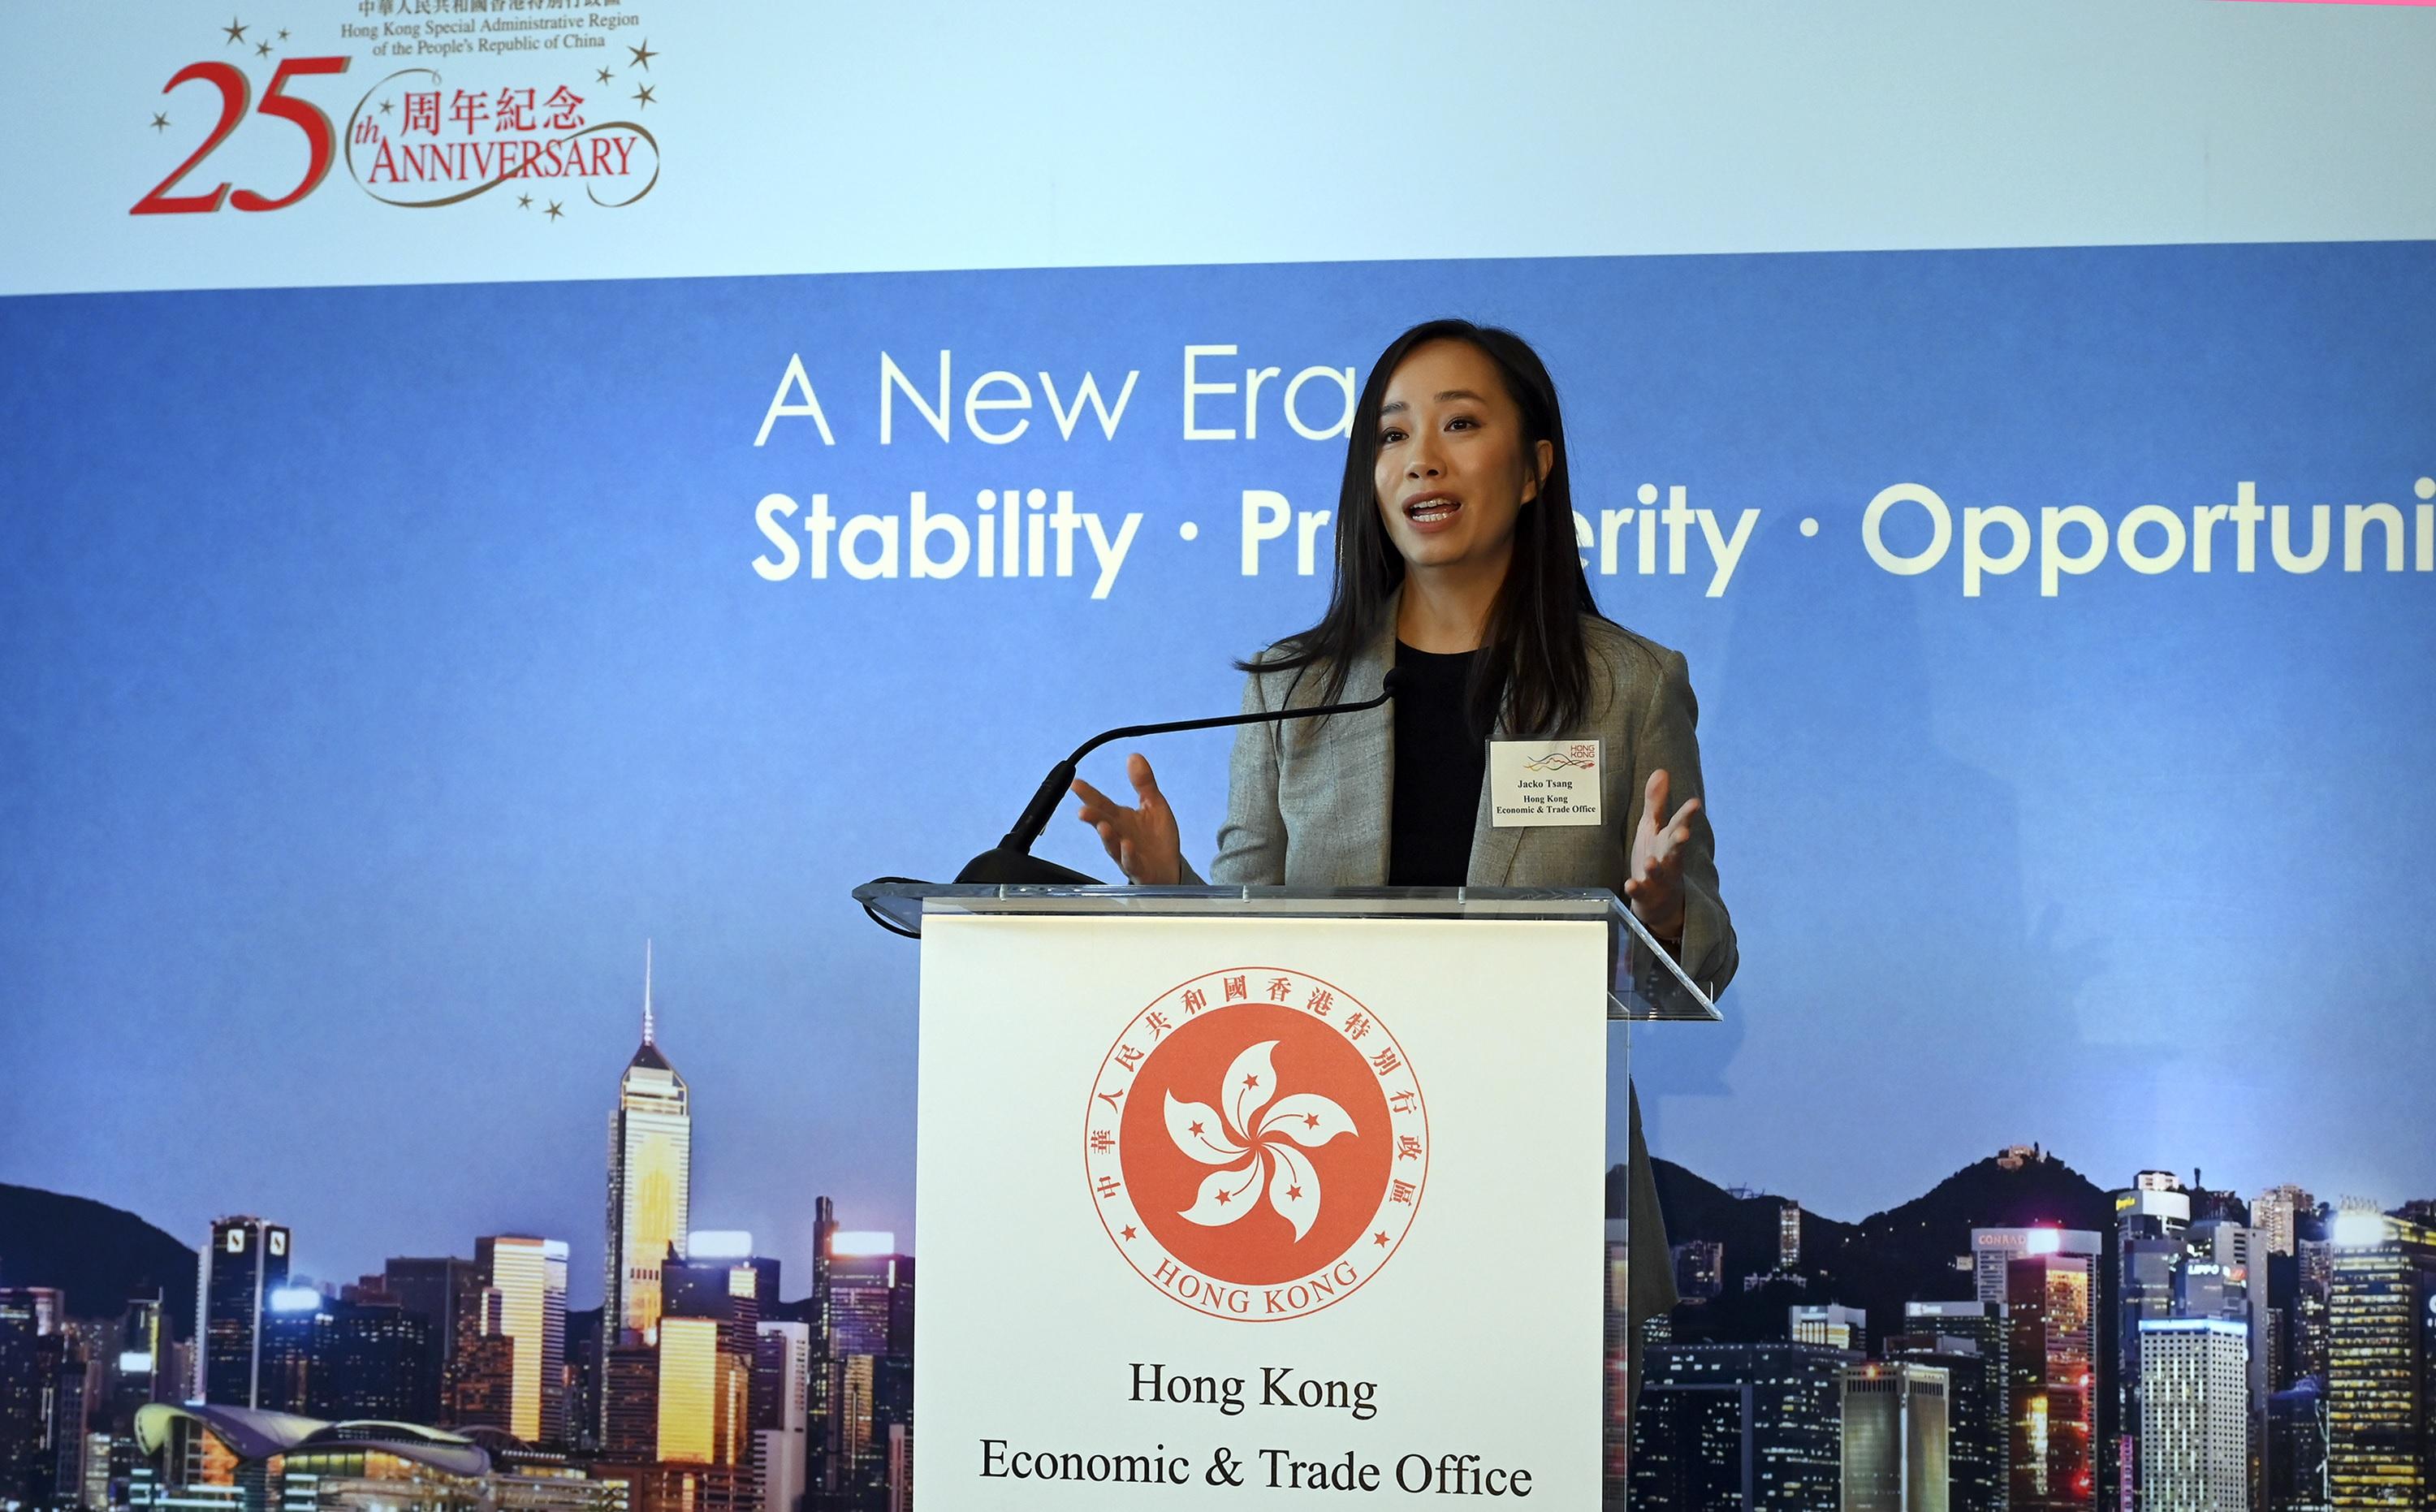 The Director of the Hong Kong Economic and Trade Office in San Francisco, Ms Jacko Tsang, delivers welcome remarks at a business luncheon celebrating the 25th anniversary of the establishment of the Hong Kong Special Administrative Region. The event was held in Los Angeles, California, on October 26 (Los Angeles time).